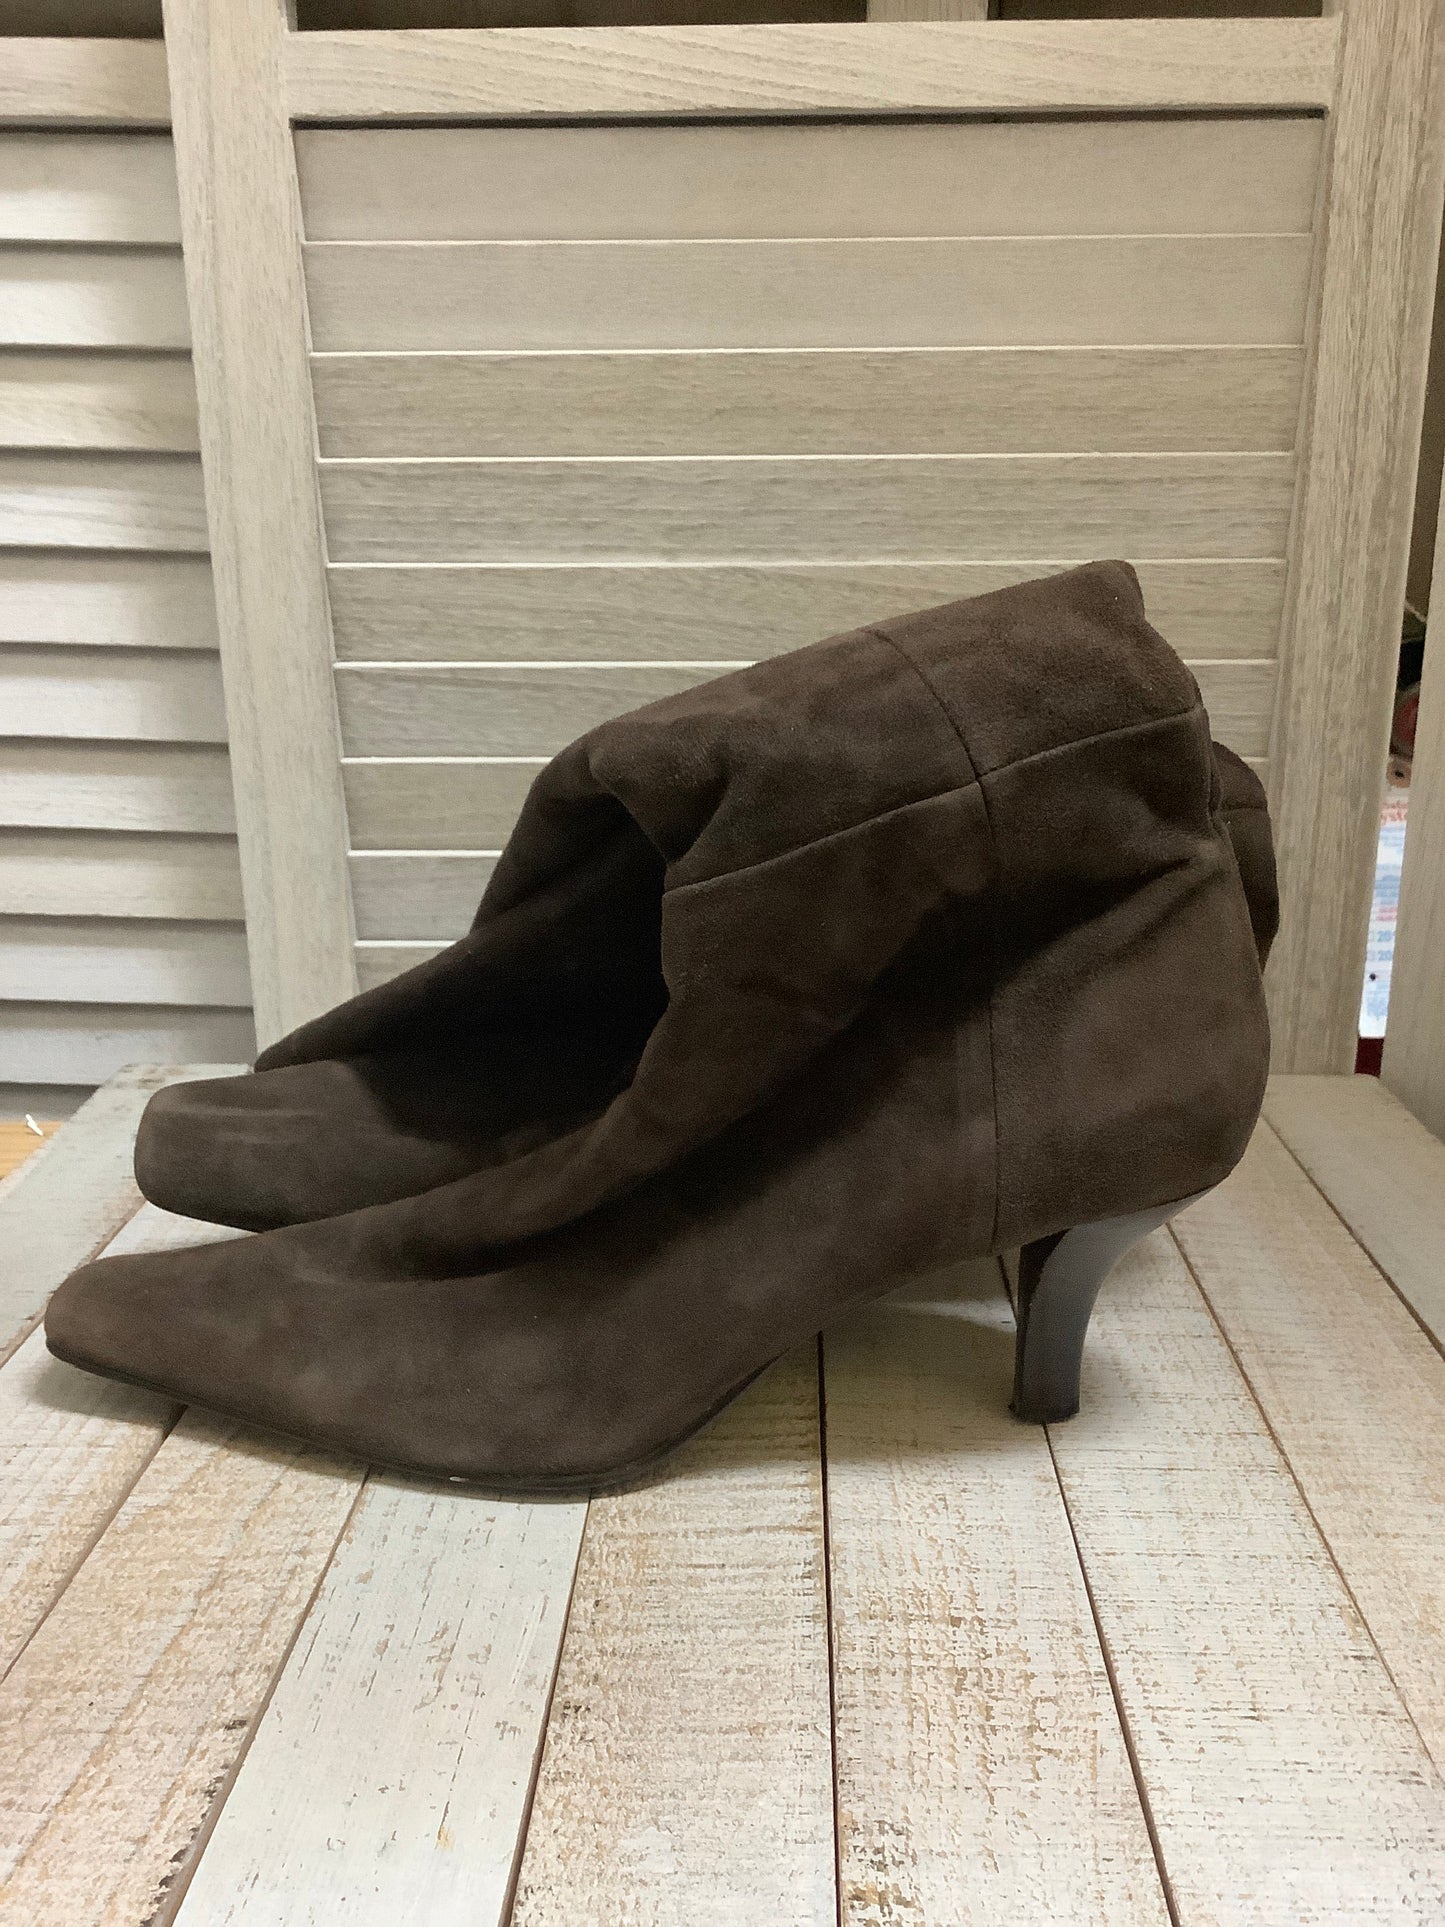 Boots Mid-calf Heels By Bandolino  Size: 9.5